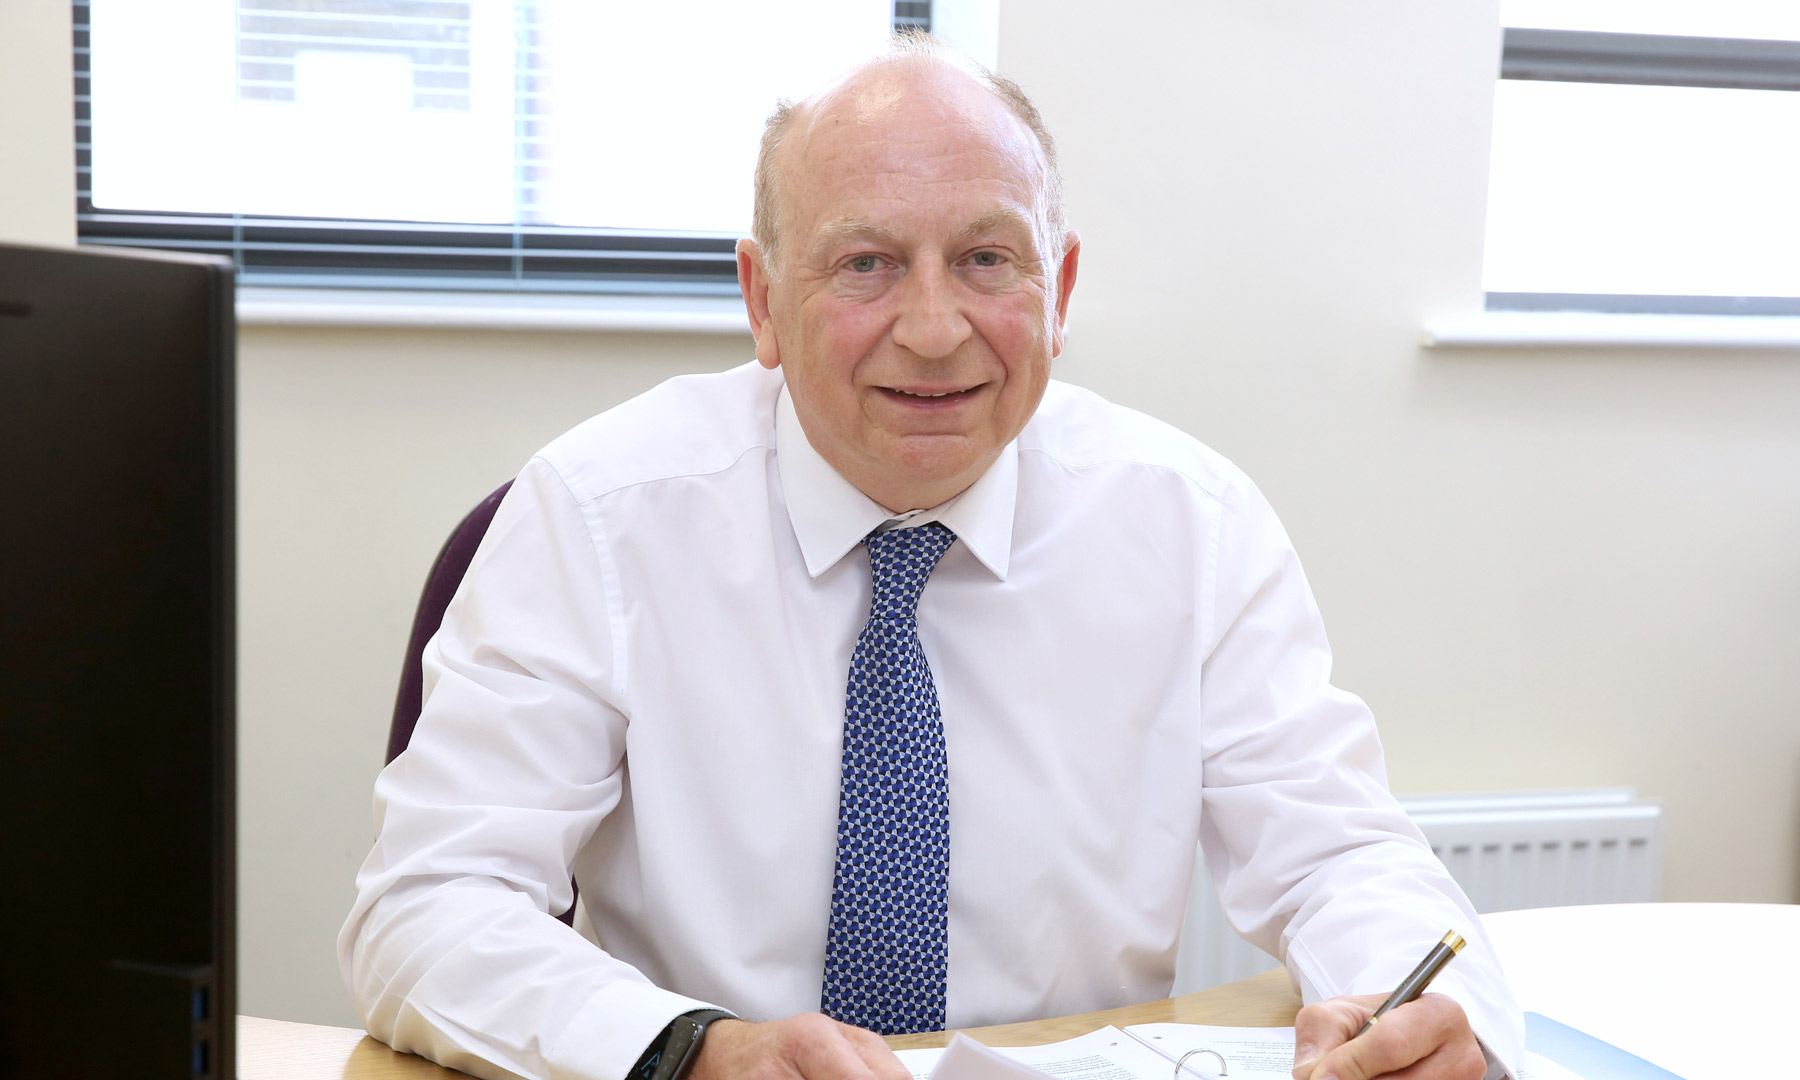 North Yorkshire Police, Fire and Crime Commissioner Philip Allott